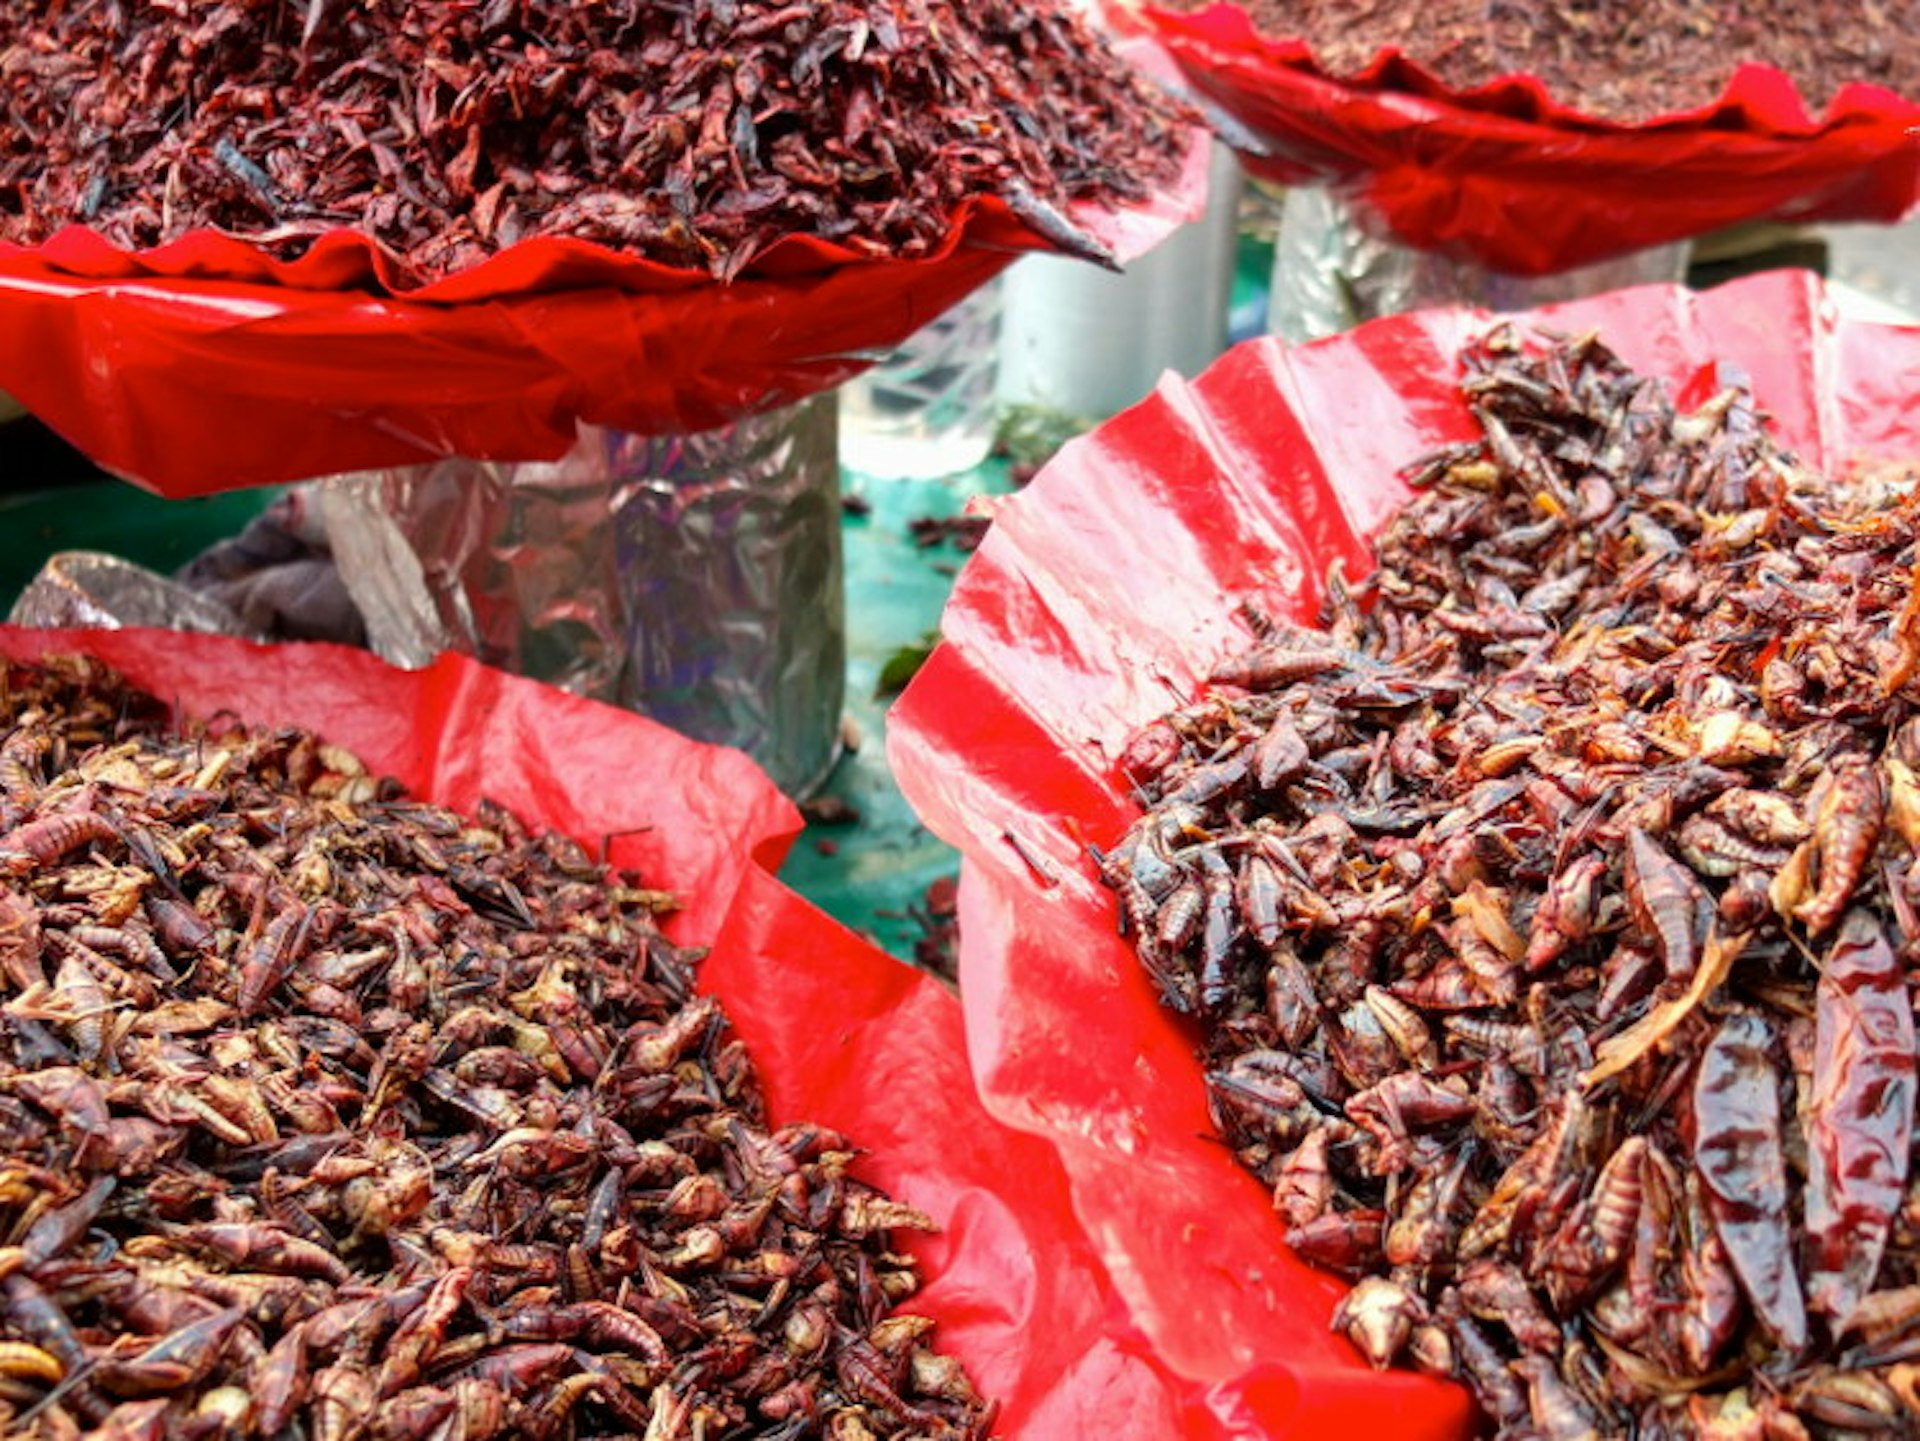 Grasshoppers have been popular in Mexico since before Europeans arrived. Image by Sarah Gilbert / Lonely Planet